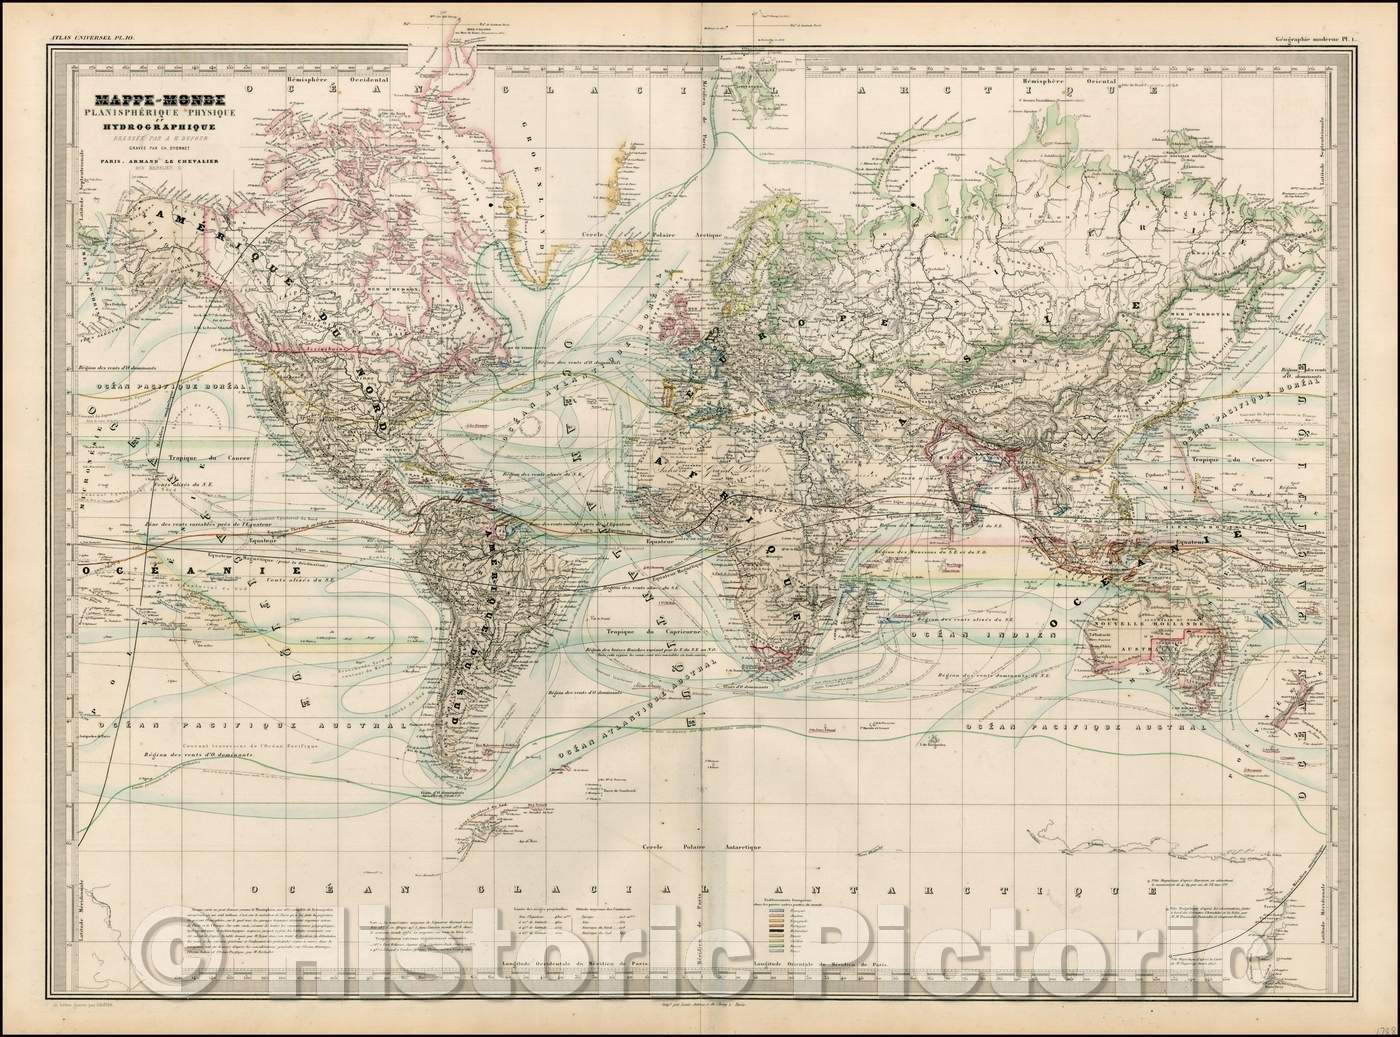 Historic Map - Mappe-Monde Planispherique Physique et Hydrographique/World  Map, handcolored by continent and country, 1858, Adolphe Hippolyte Dufour 